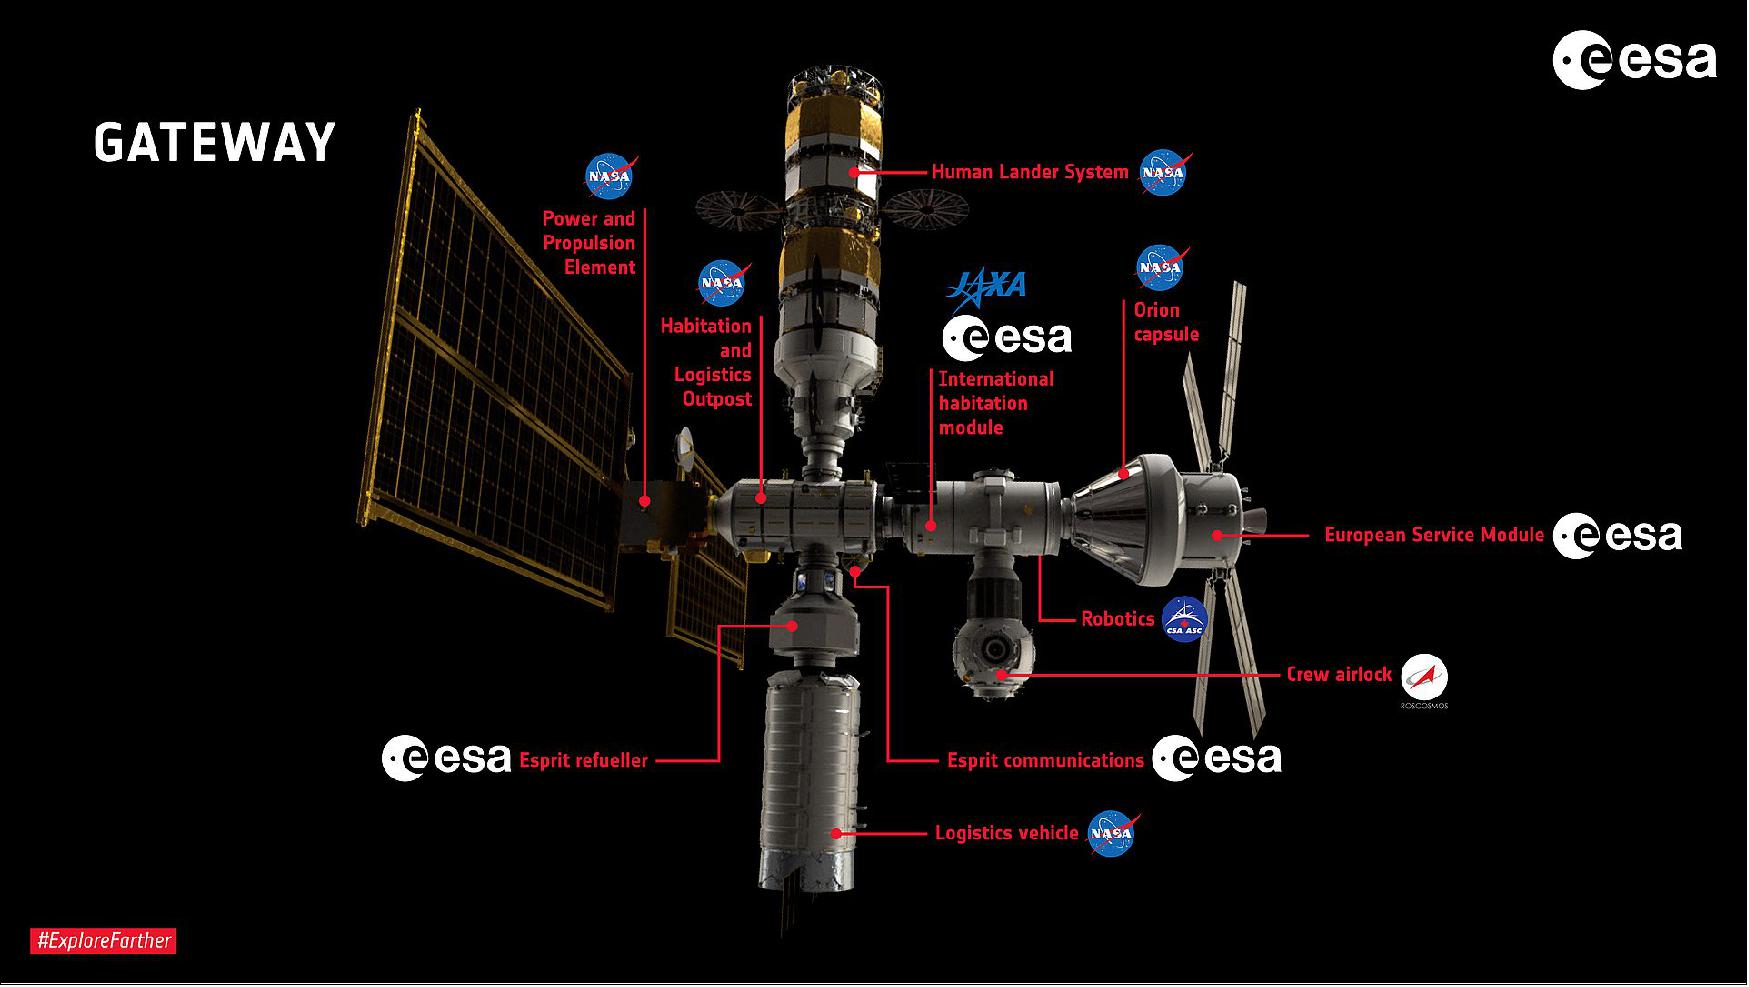 Figure 13: The space Gateway is the next structure to be launched by the partners of the International Space Station (image credit: NASA/ESA)